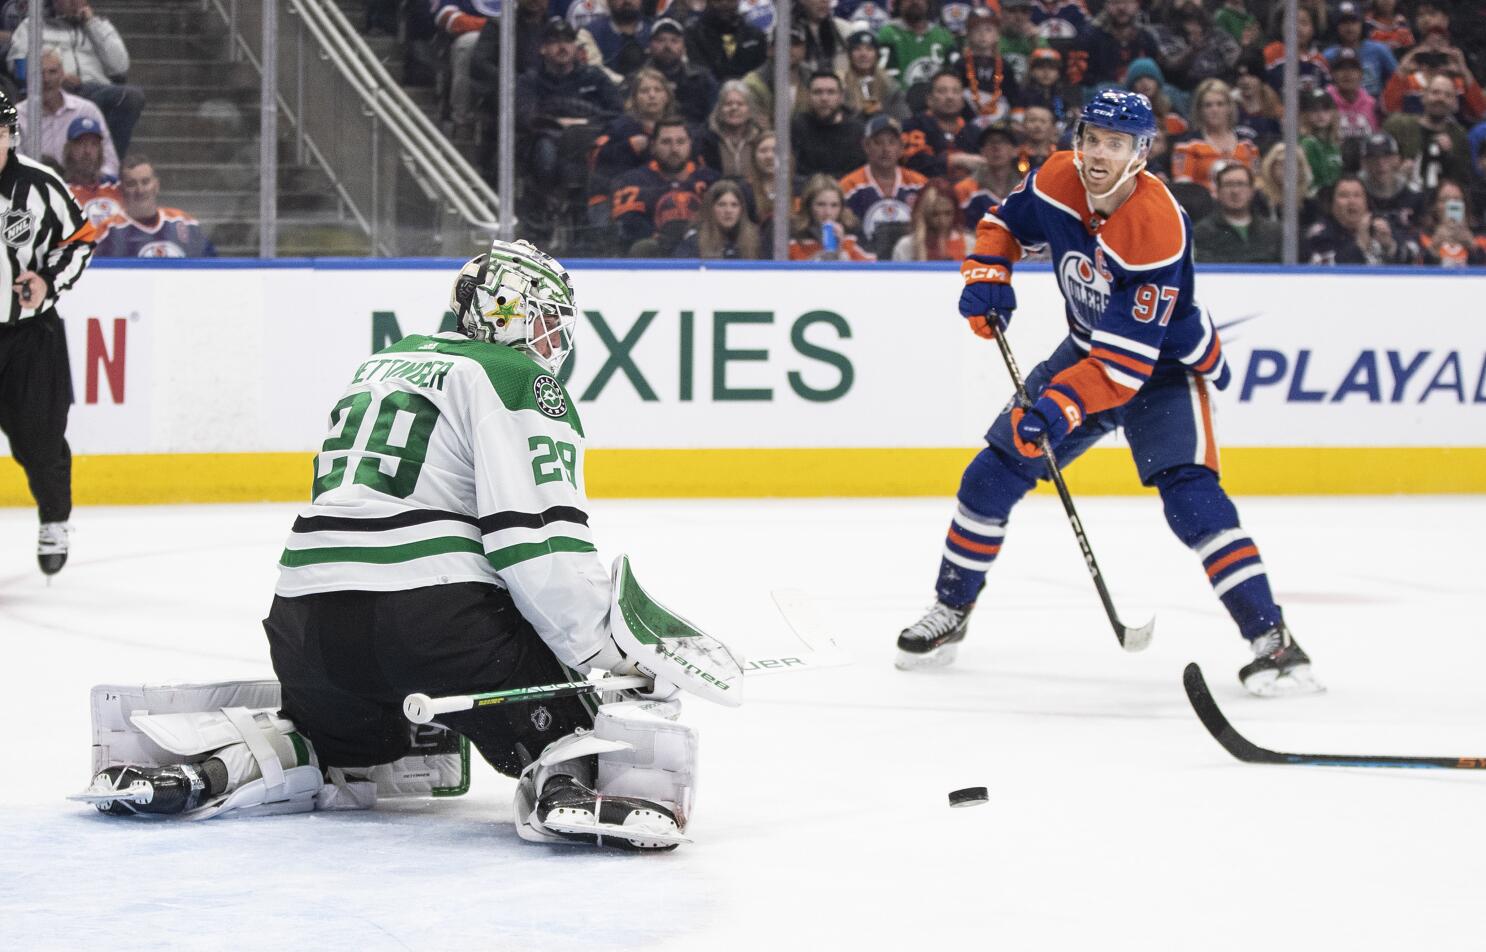 Connor McDavid takes lessons from losing in first NHL season - The